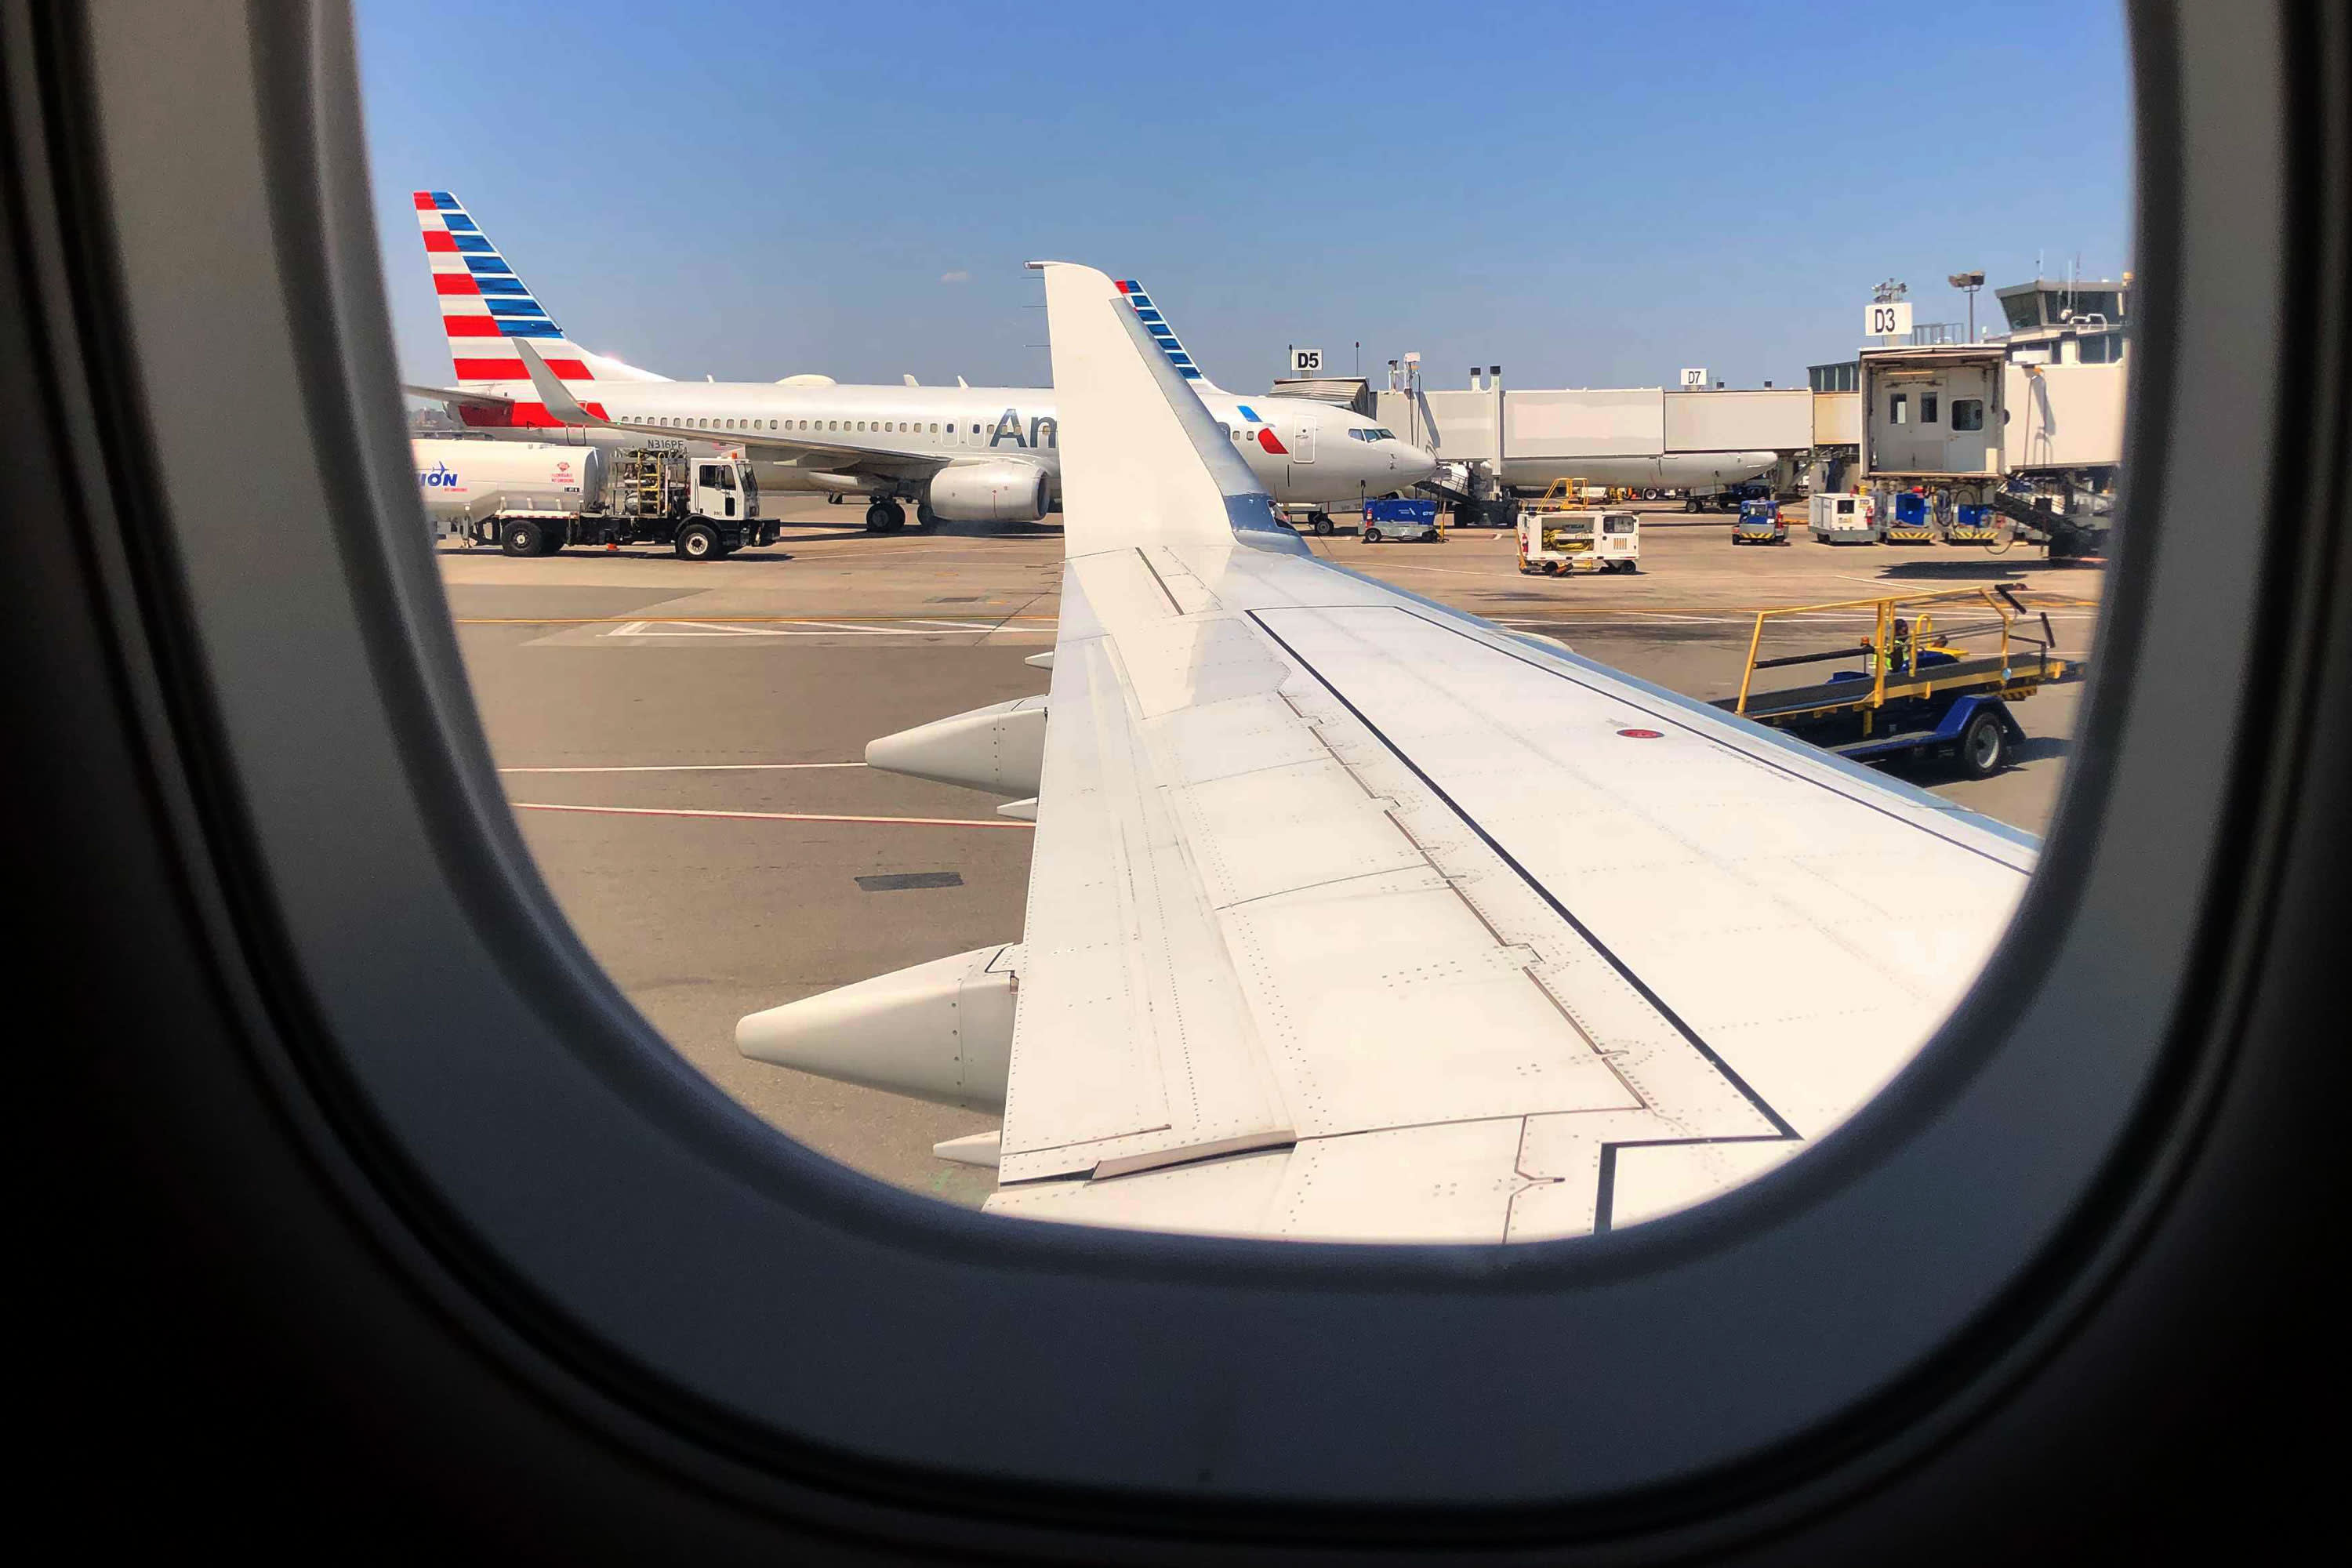 American Airlines cancels hundreds of flights due to staffing crunch, maintenance issues